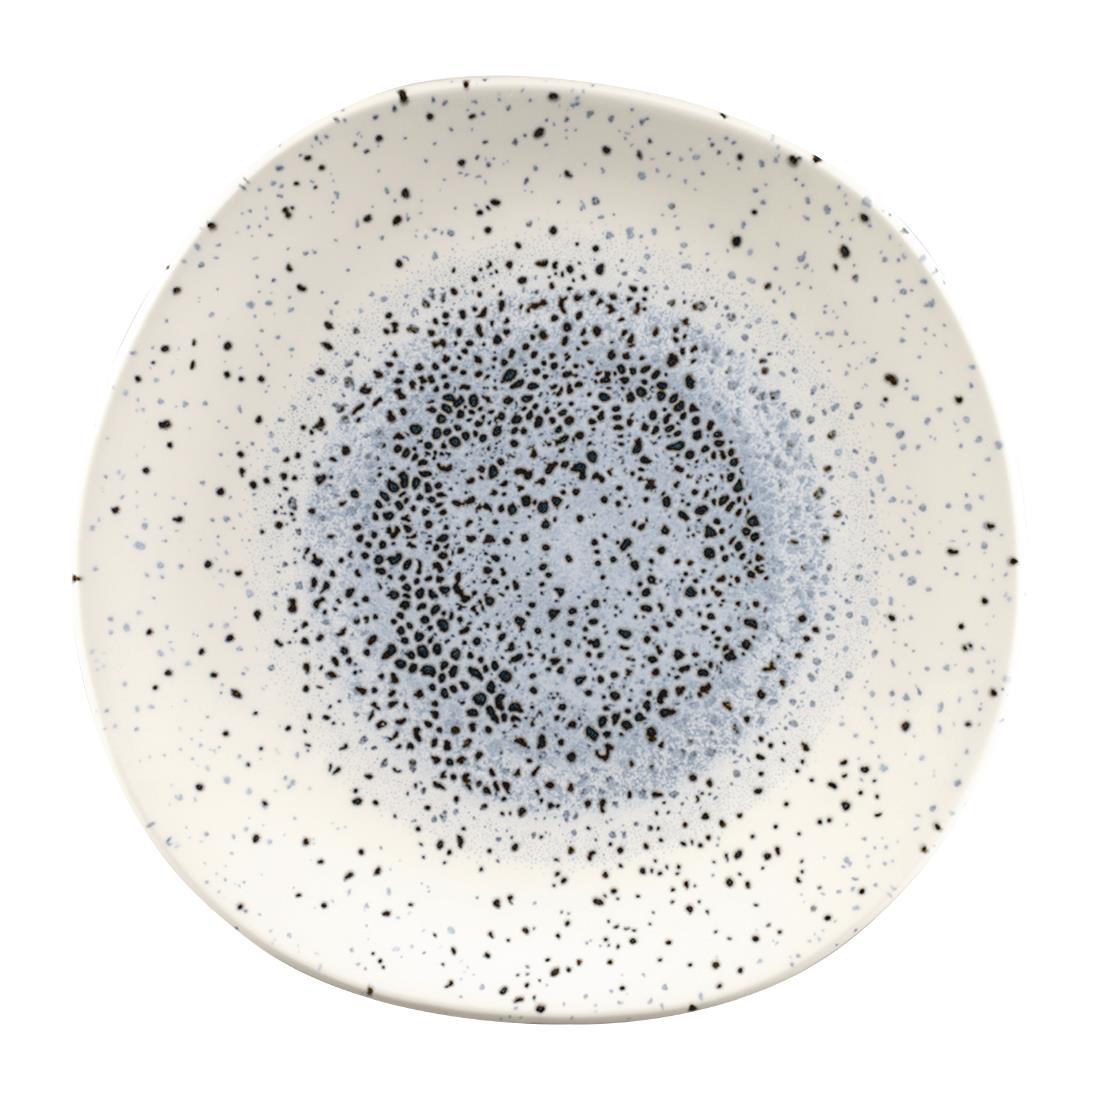 Churchill Studio Prints Mineral Blue Centre Organic Round Plates 264mm (Pack of 12) - FC126  - 1